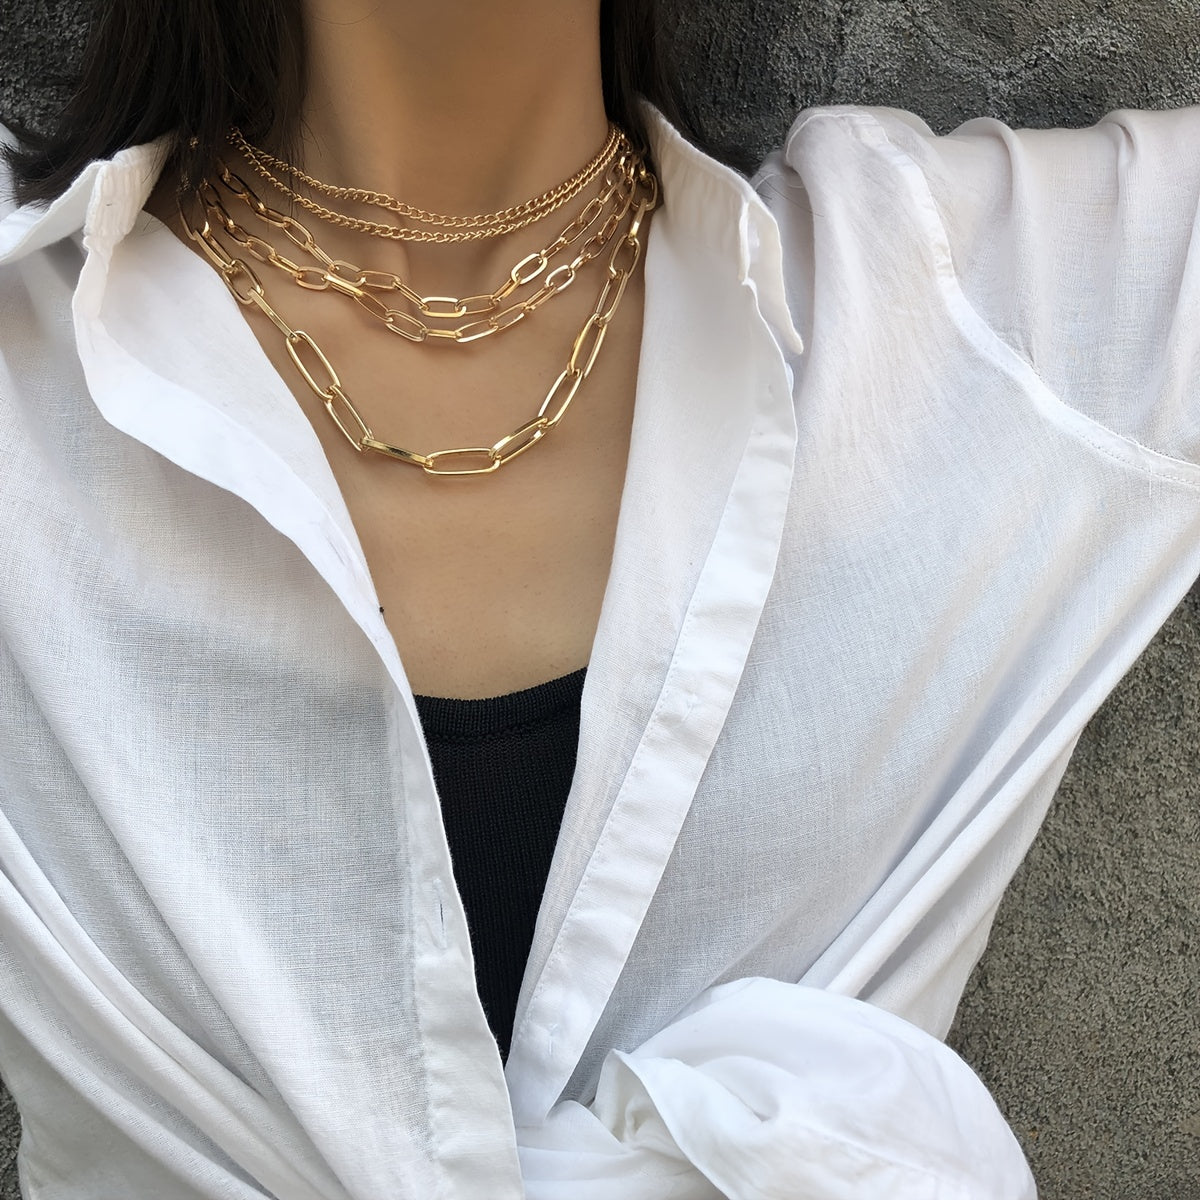 Vintage-Inspired Layered Necklace - Simple Metal Chain Bone Chain Jewelry for Women